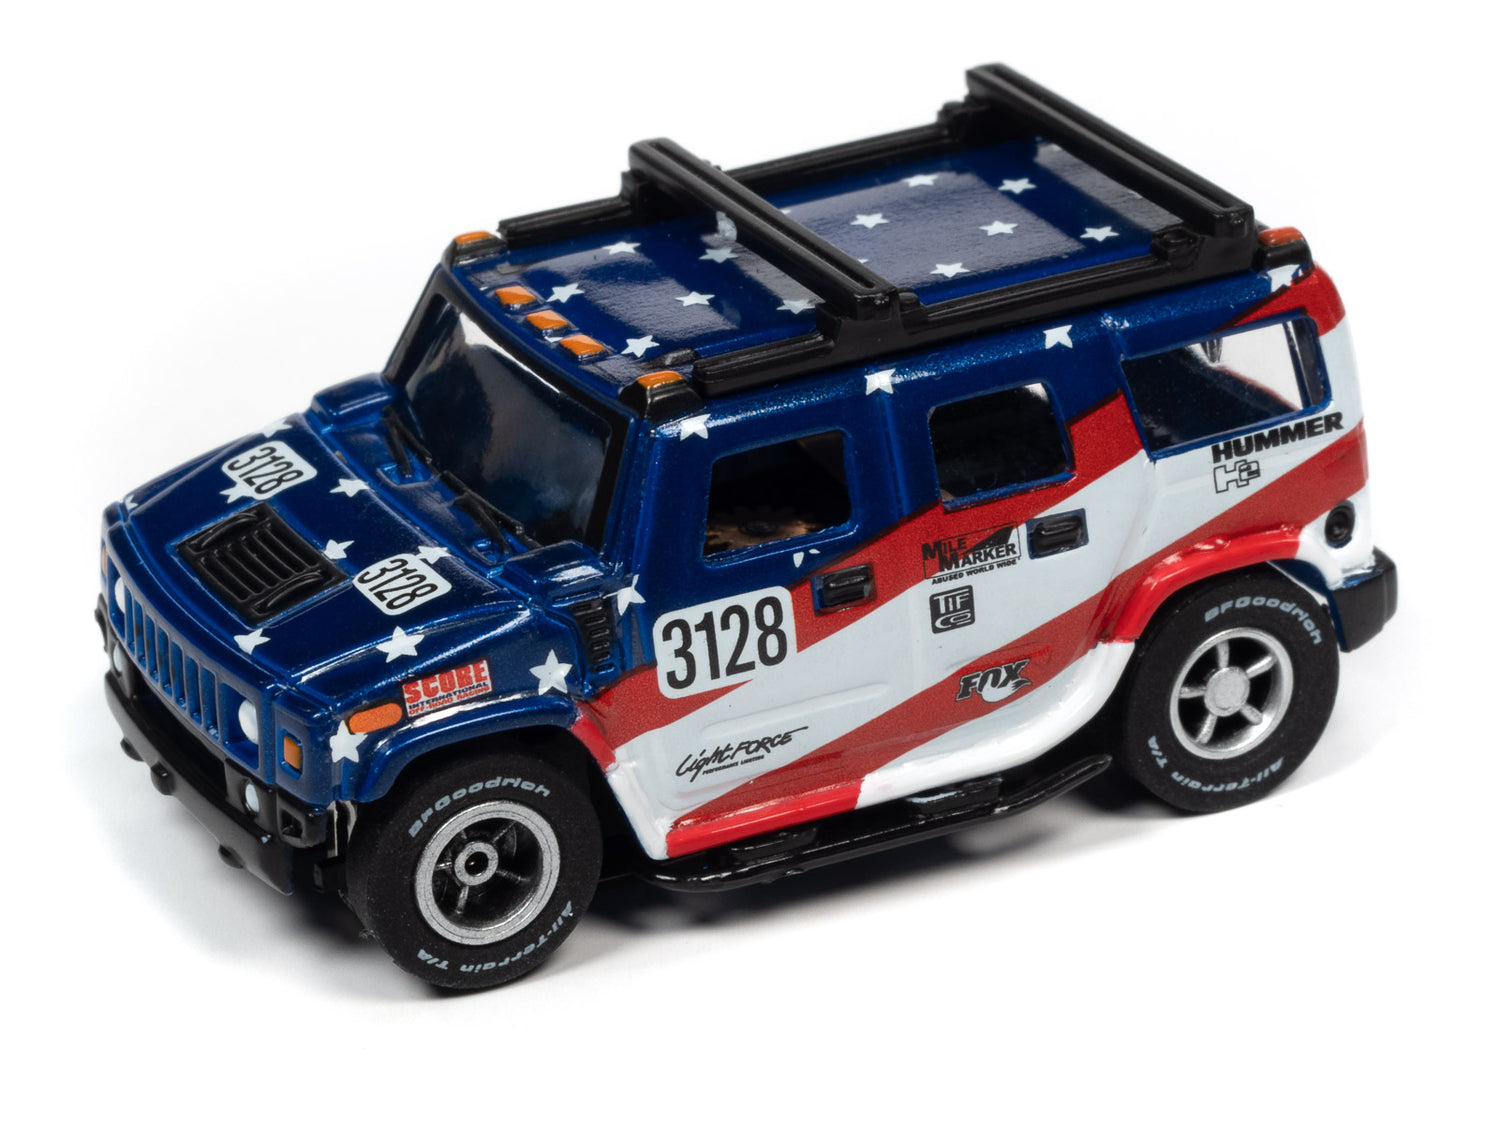 Auto World Xtraction Rally 2005 Hummer H2 (blue) HO Scale Slot Car